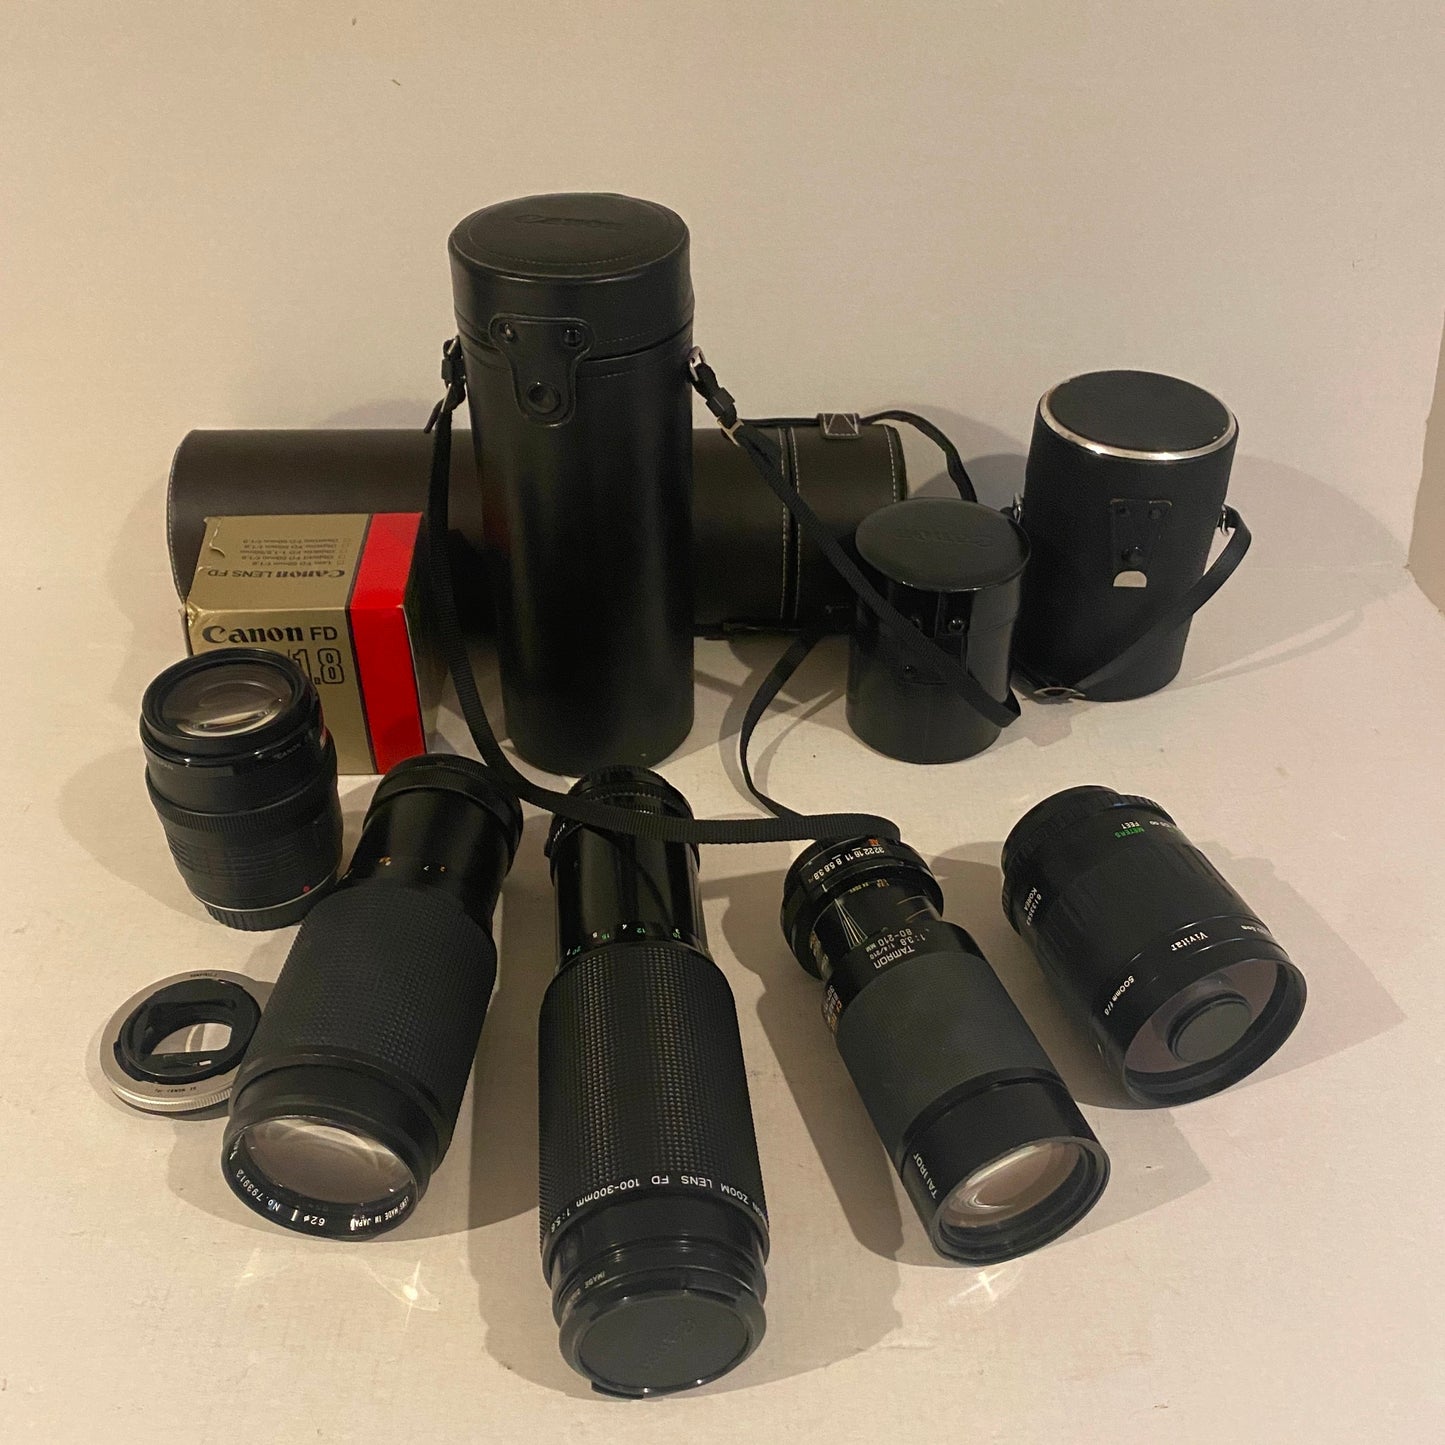 Mixed vintage lot of 6 Camera Lenses and Cases